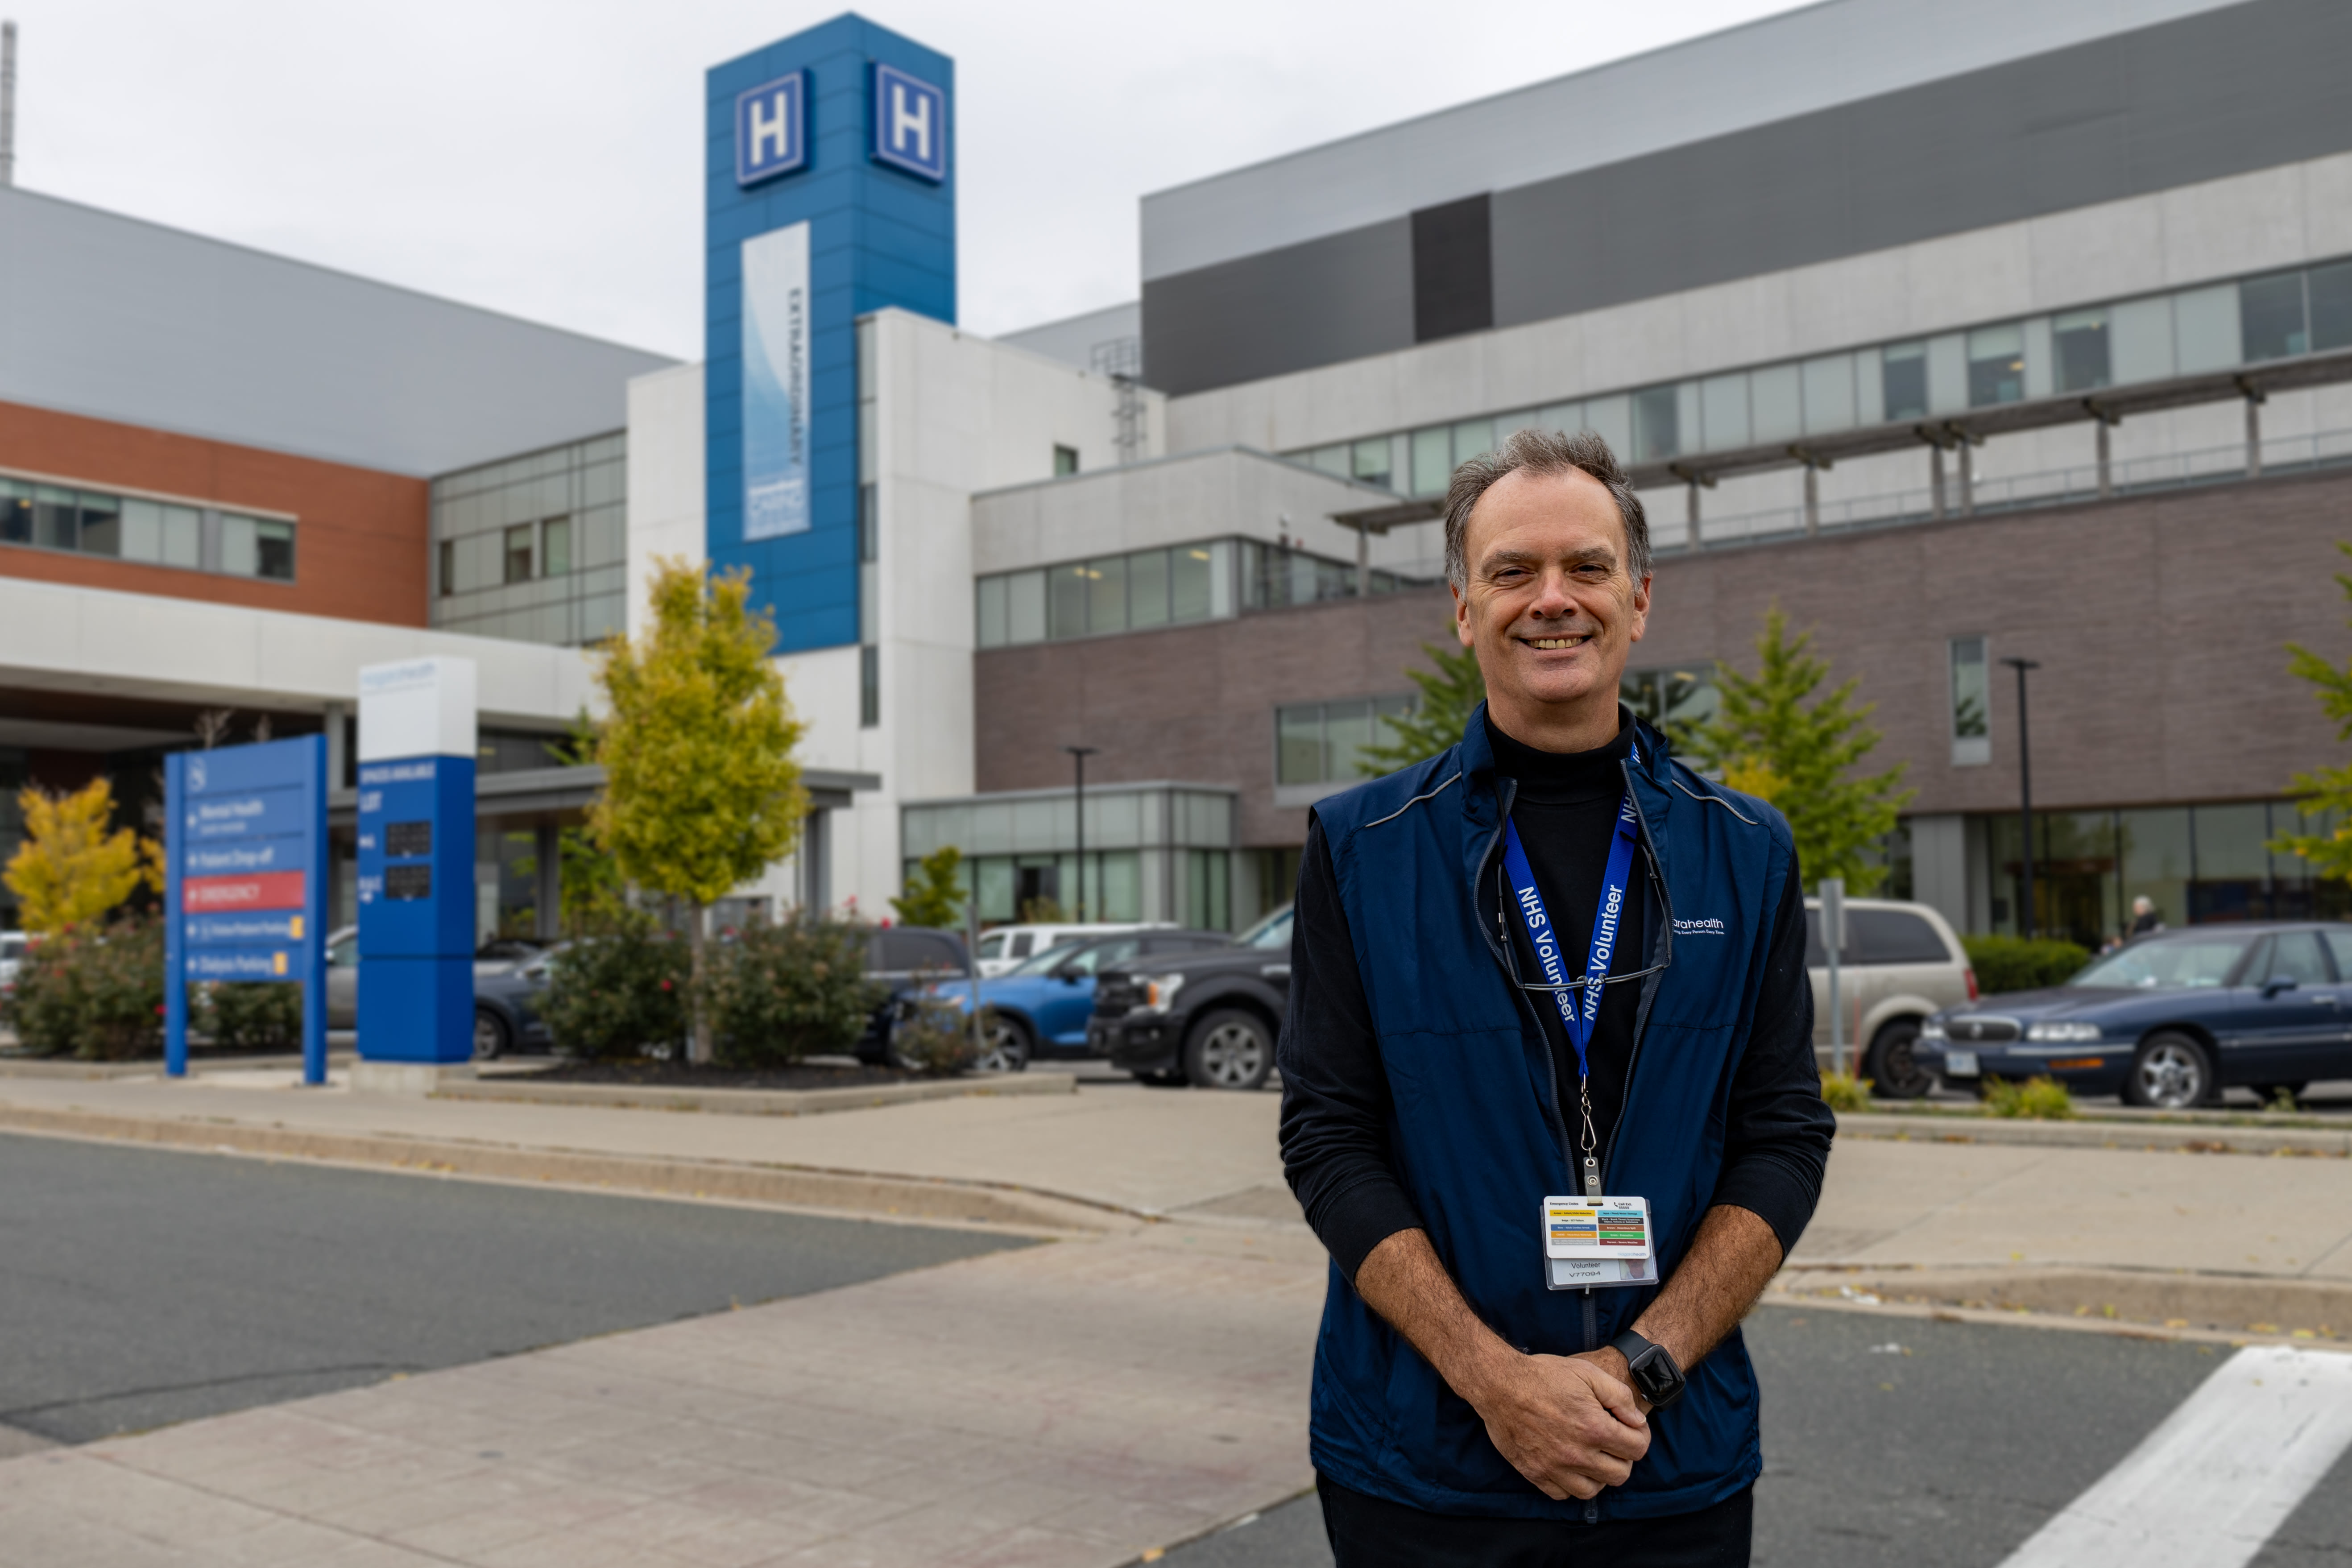 'It’s the best four hours of my week’ Niagara Health volunteer says of connecting with his community